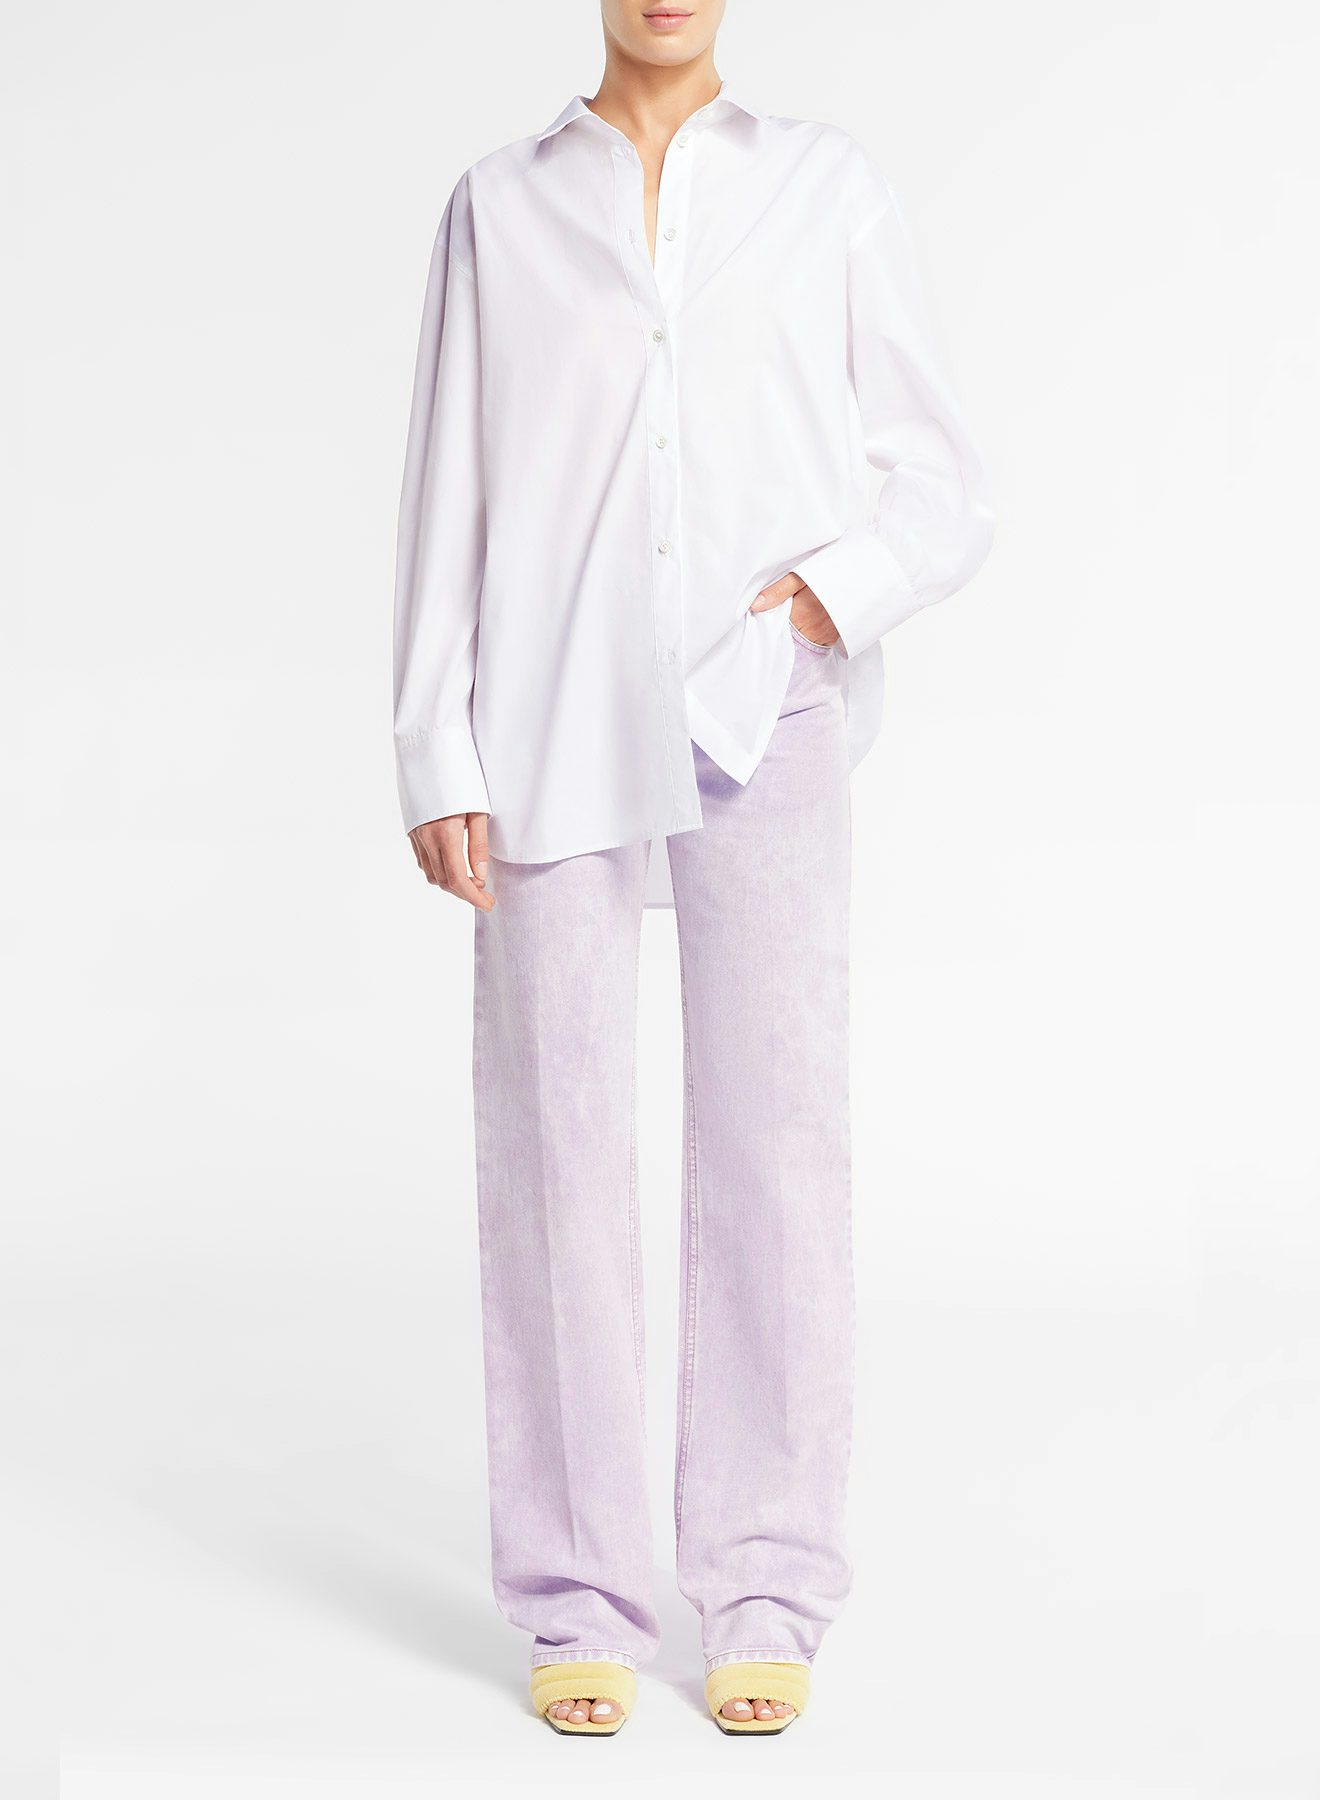 White and Grey Ficelle Crinkle Shirt with Contrasting Nina Ricci embroidery on the back - Nina Ricci